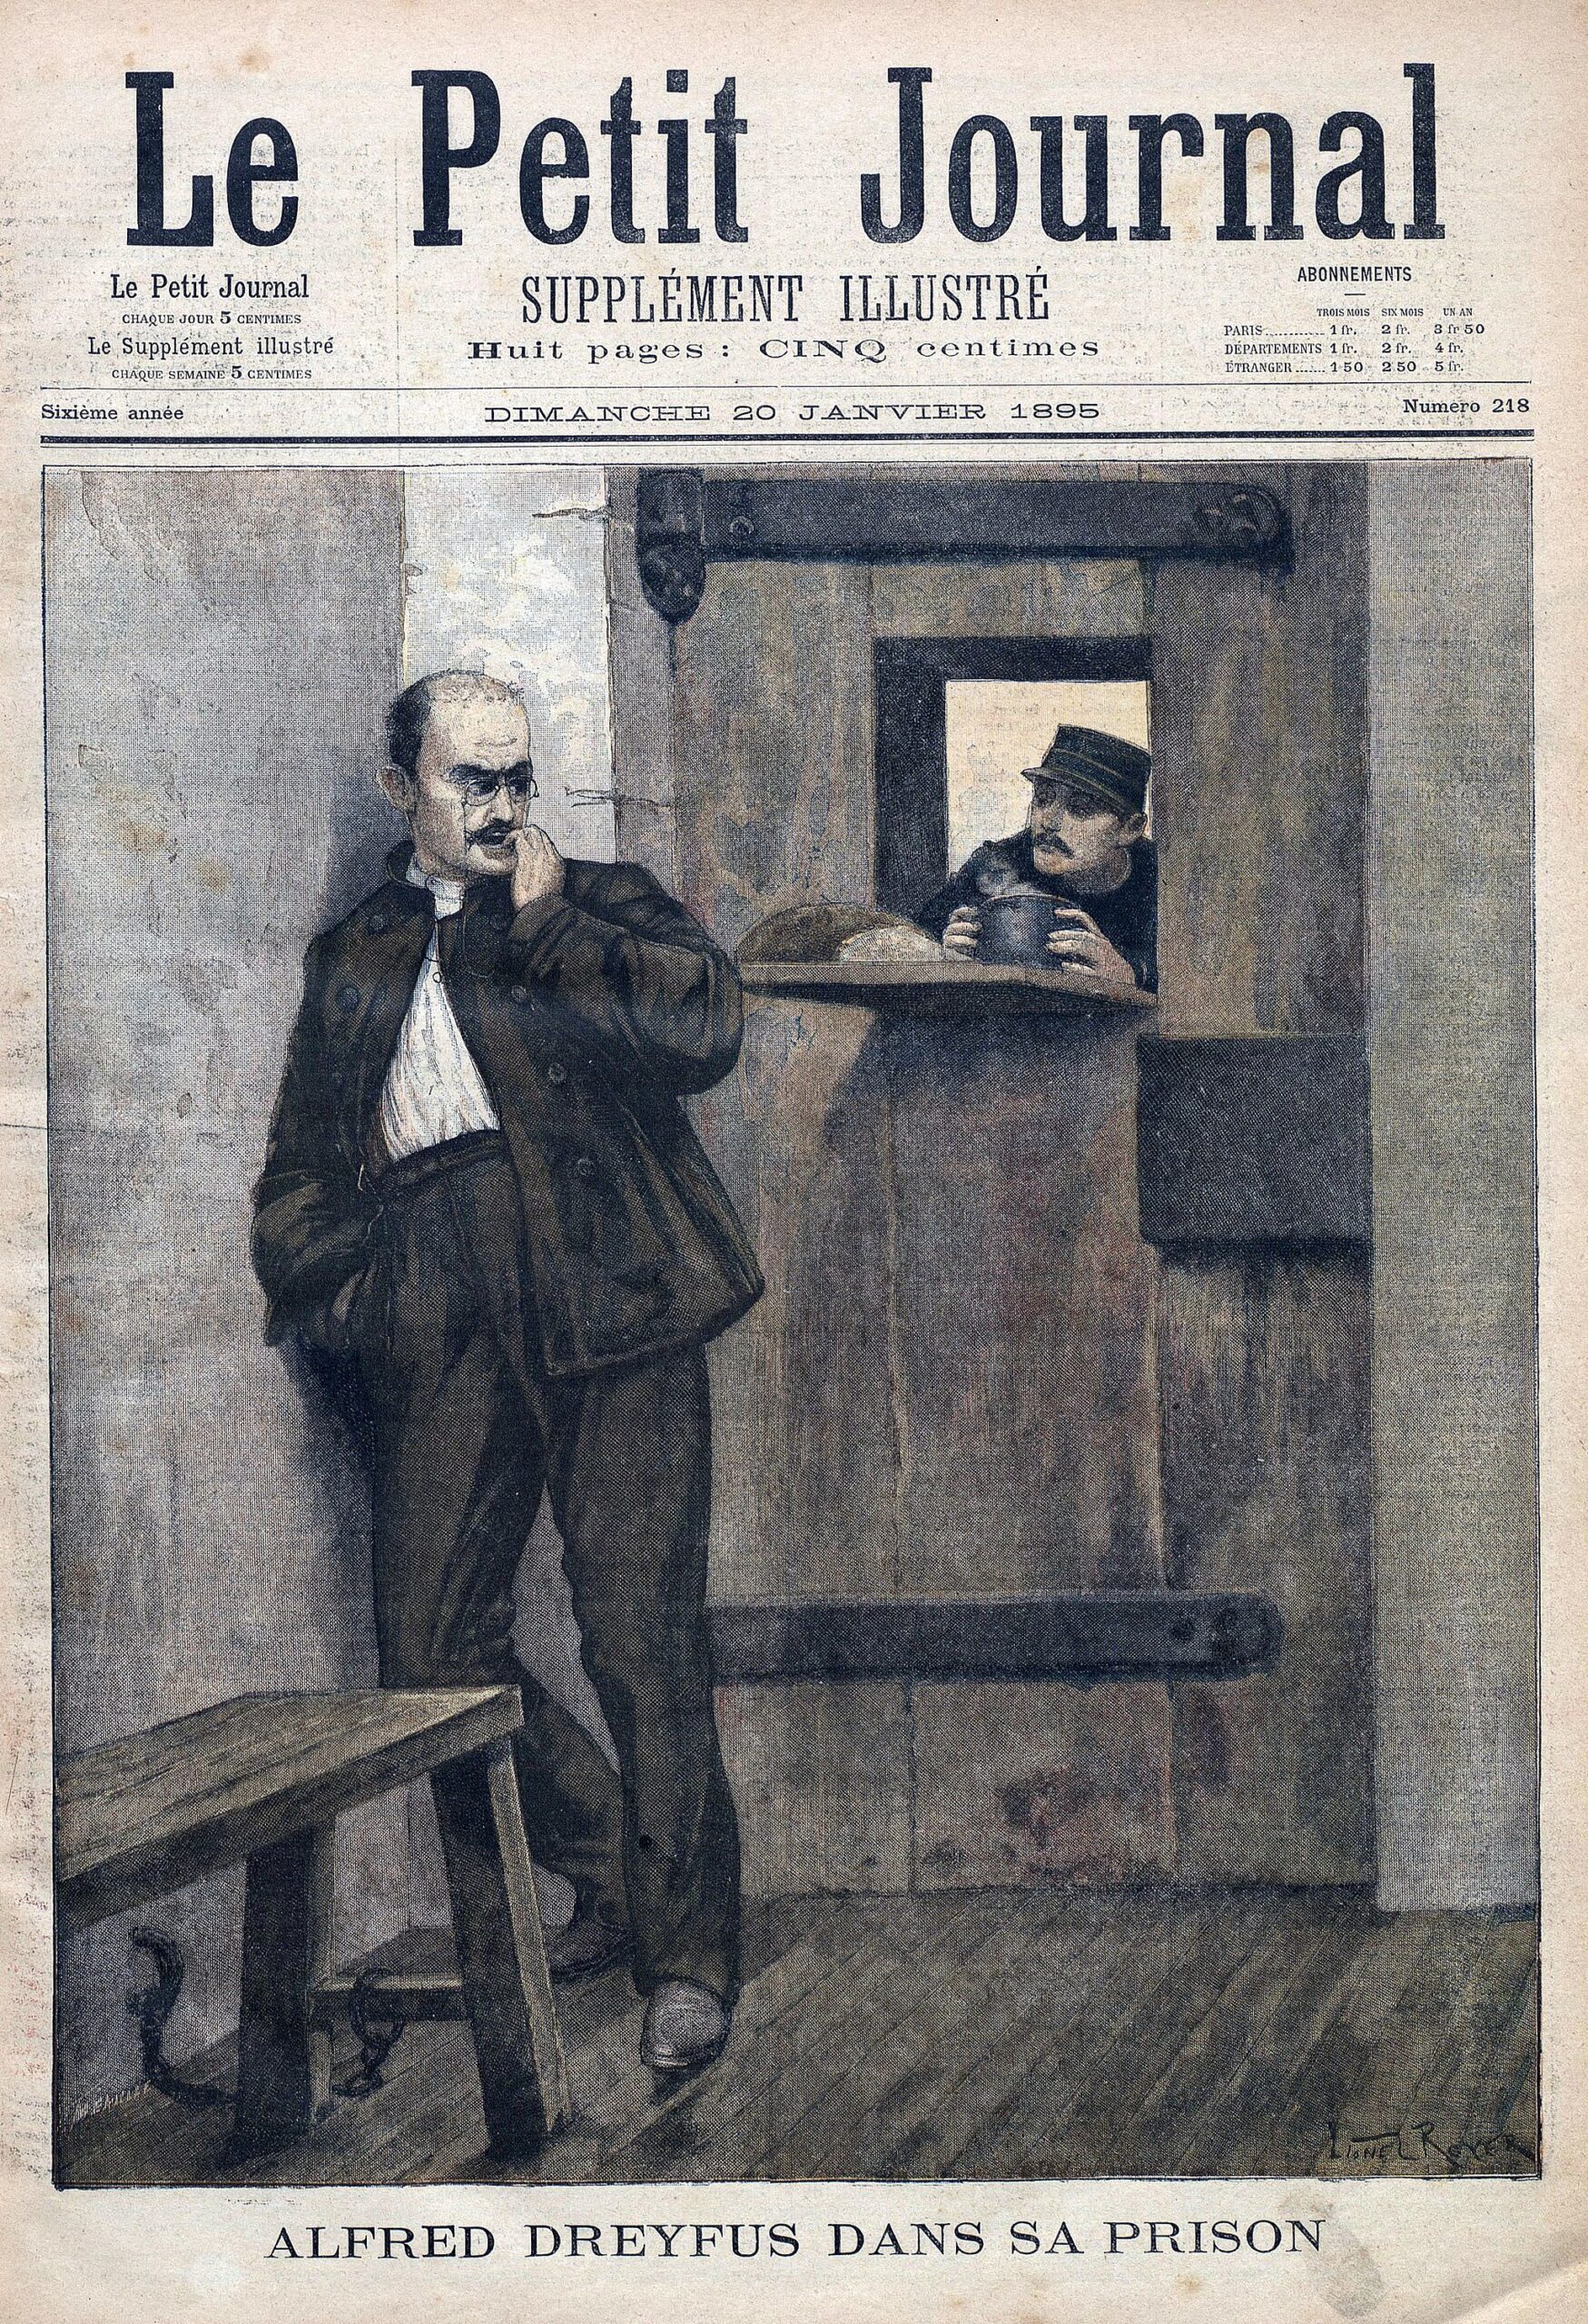 Sketch from a French newspaper depicting Alfred Dreyfus in prison, 1895 (Wikimedia Commons)